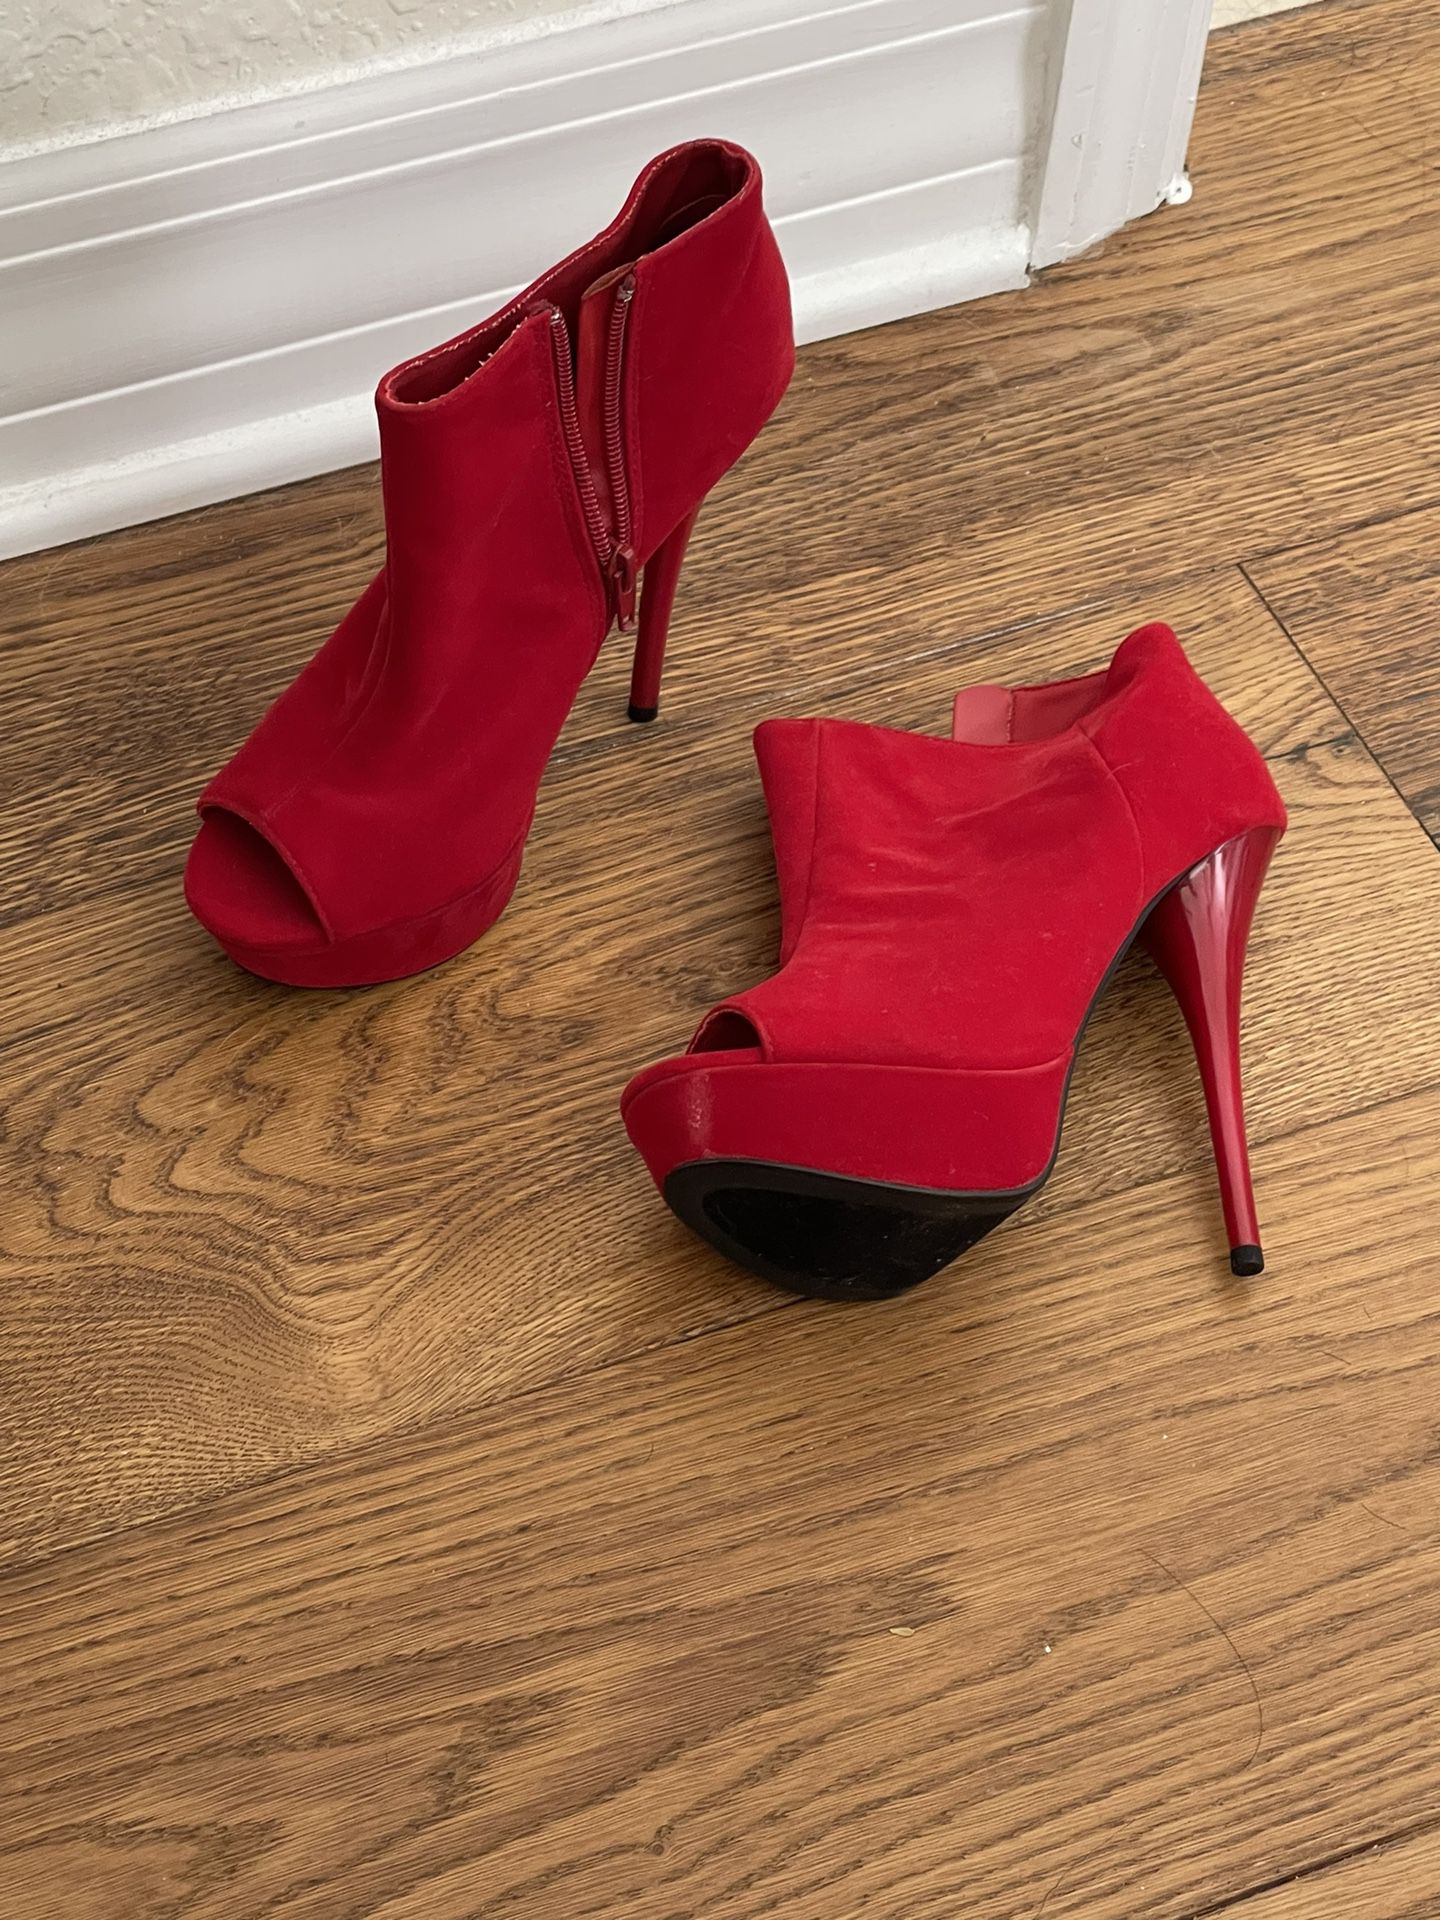 Red Sexy Shoes 5.5 Or 6